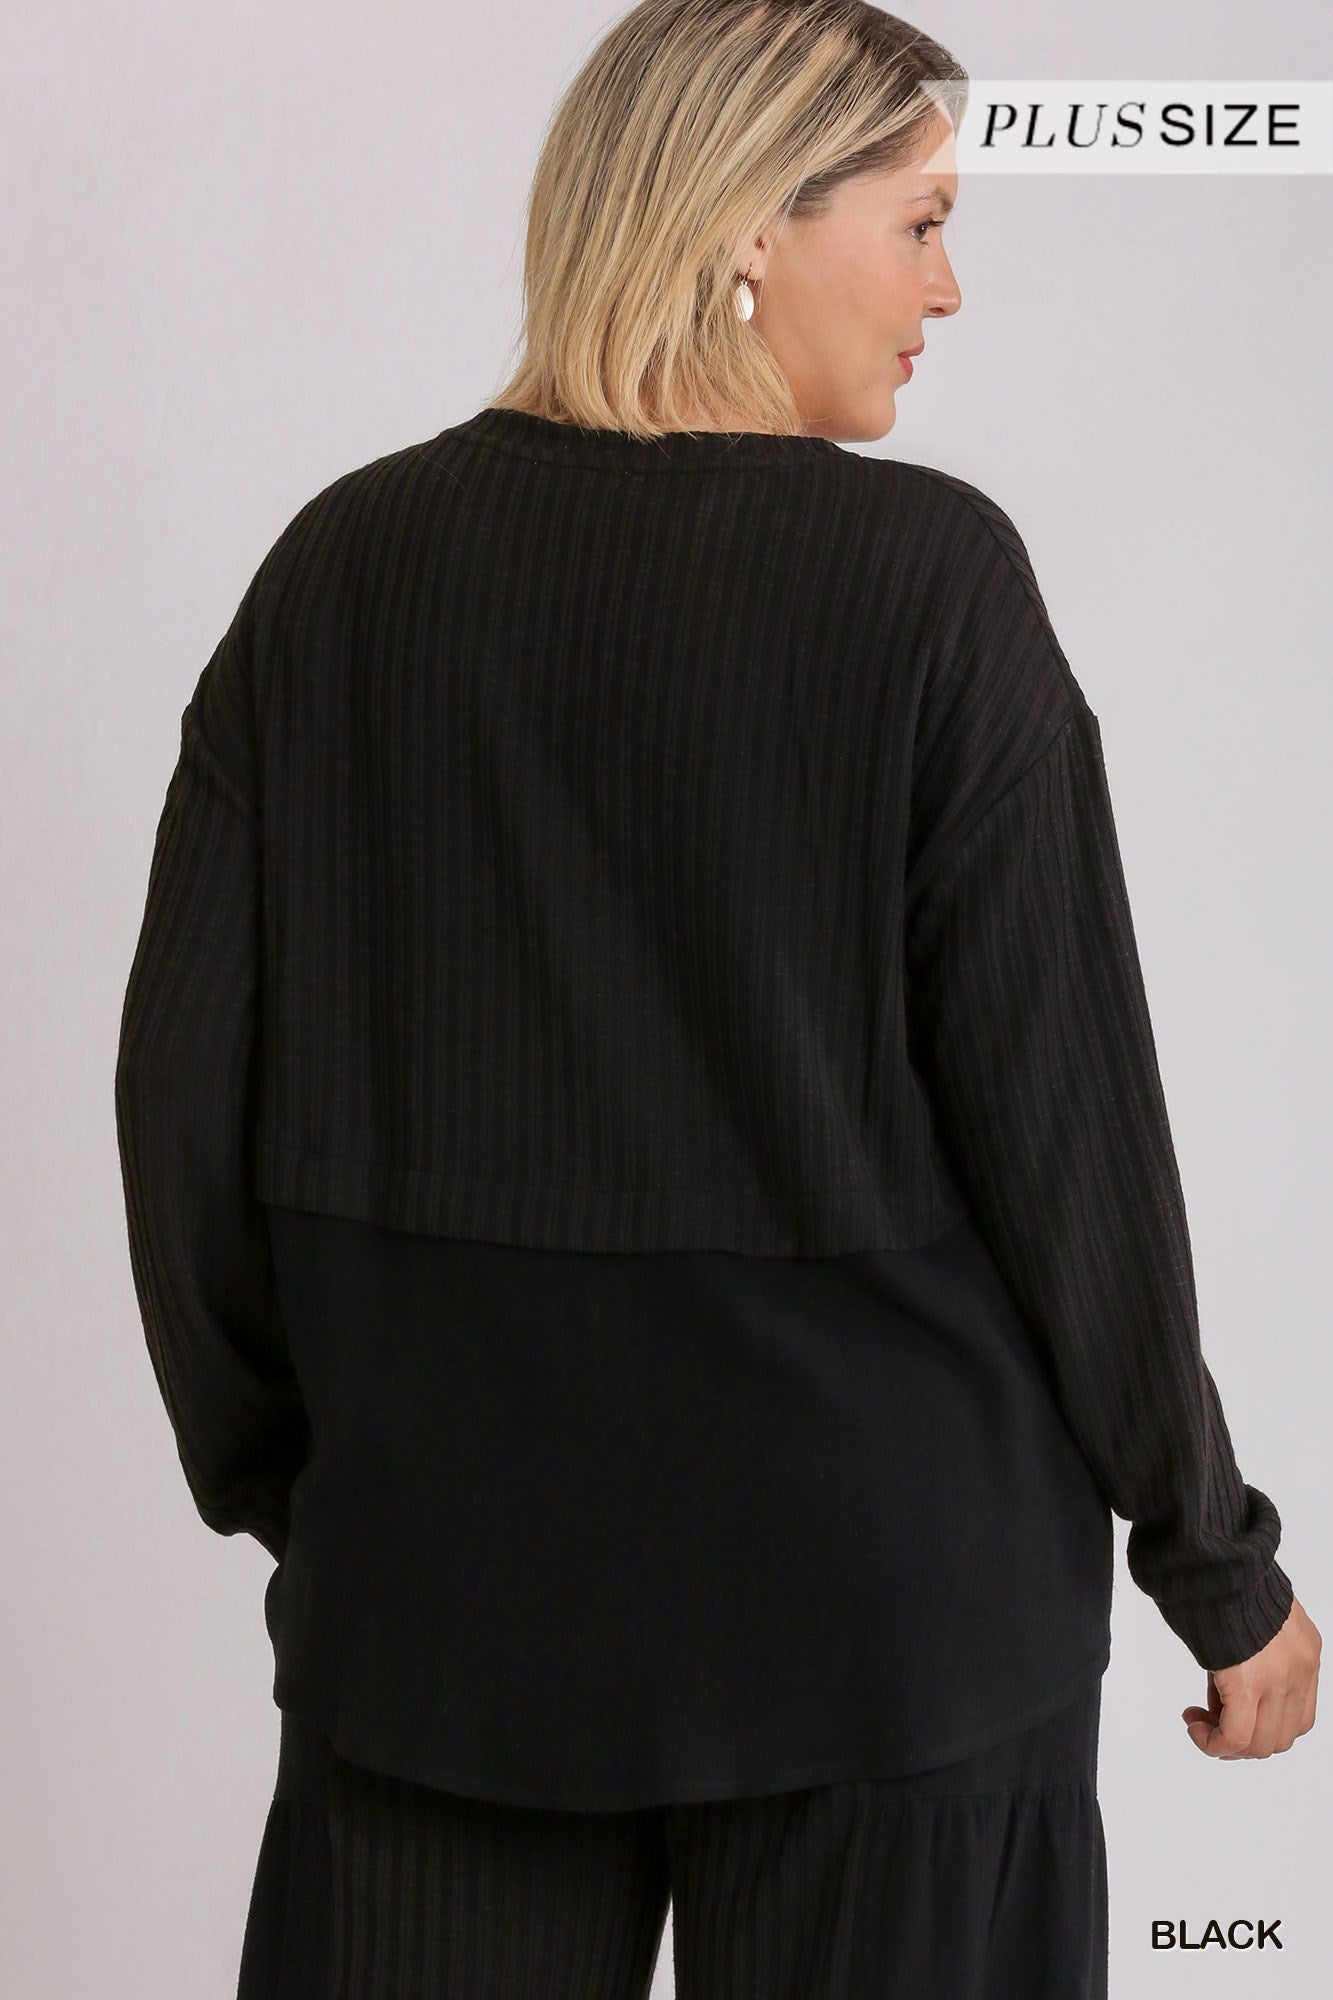 Ribbed Long Sleeve Sweater w/ Back Detail